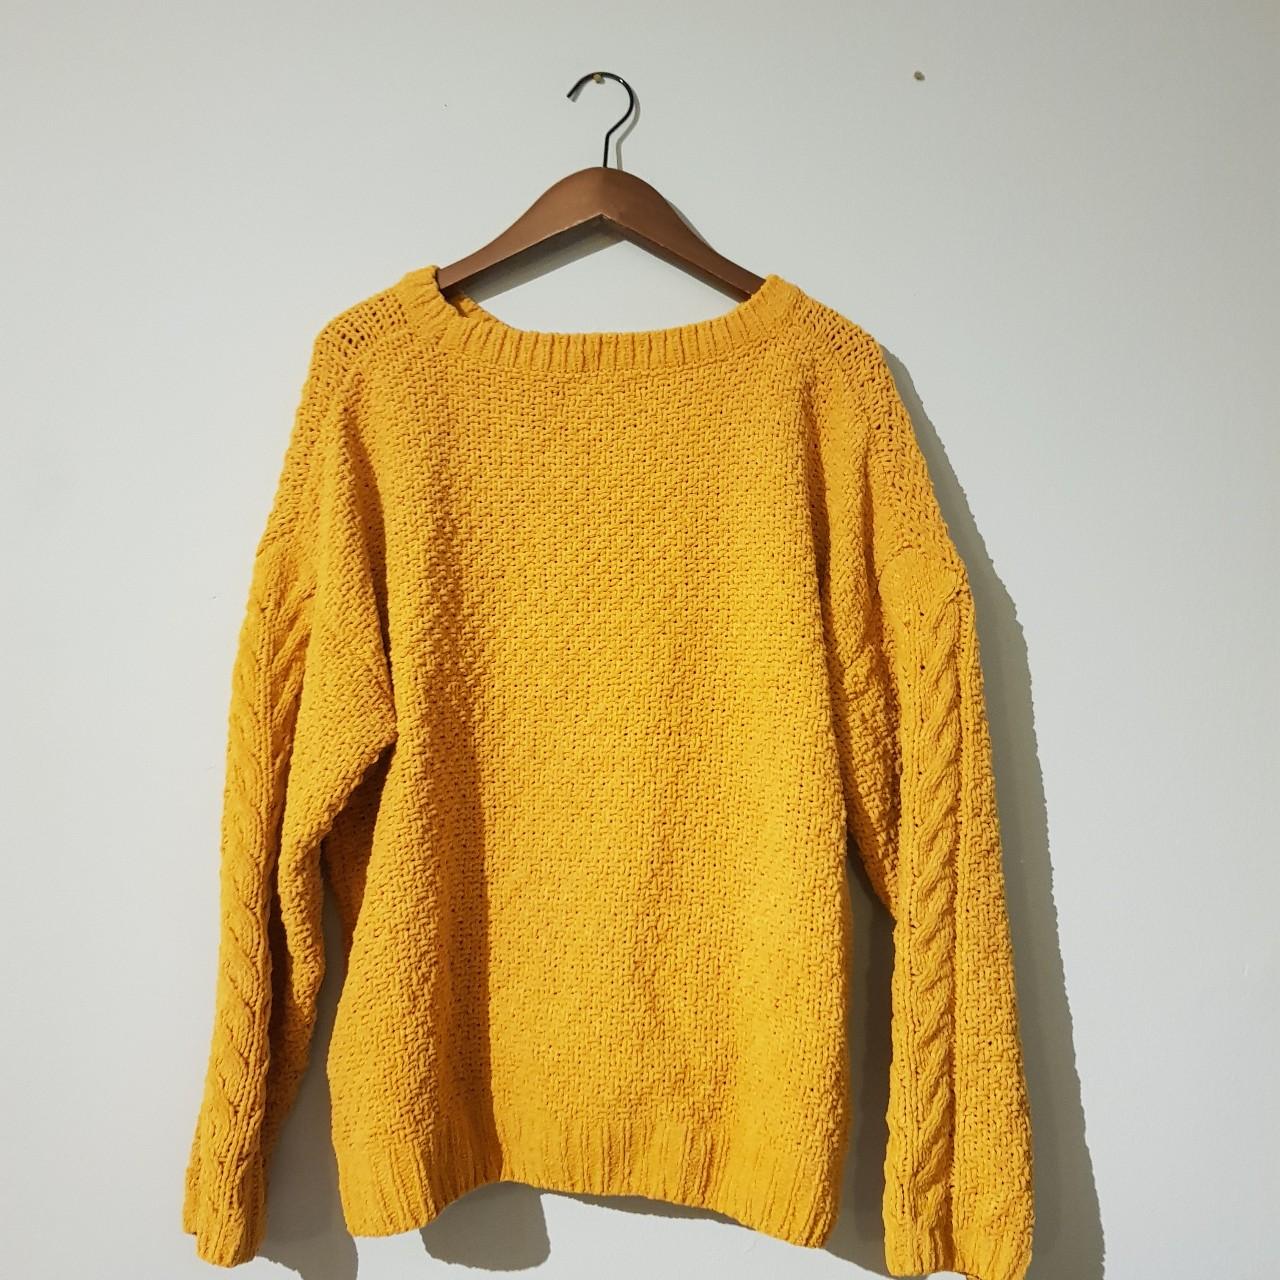 Yellow jumper - Primark Size M. Chunky wide knit... - Depop